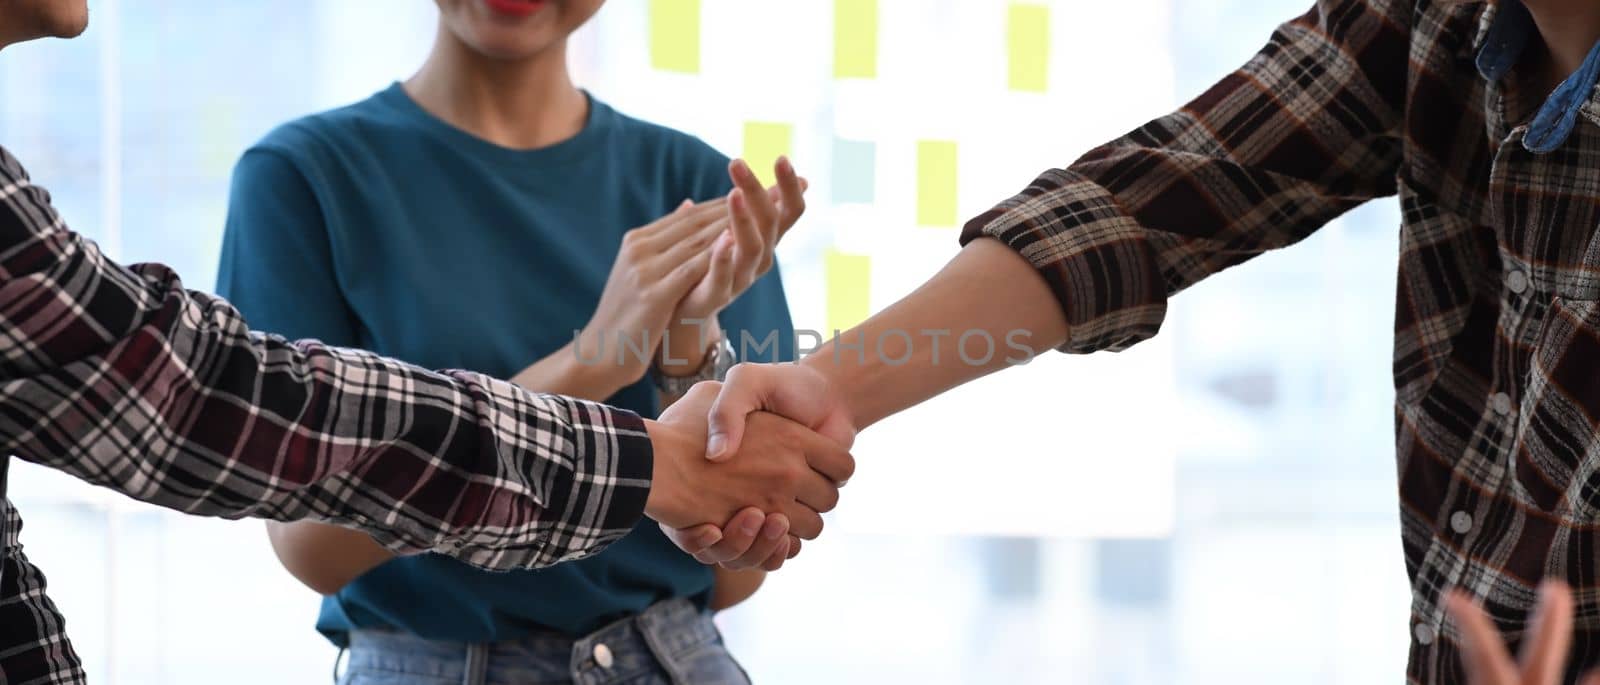 Cropped image business people shaking hands for successful agreement or after meeting in office.